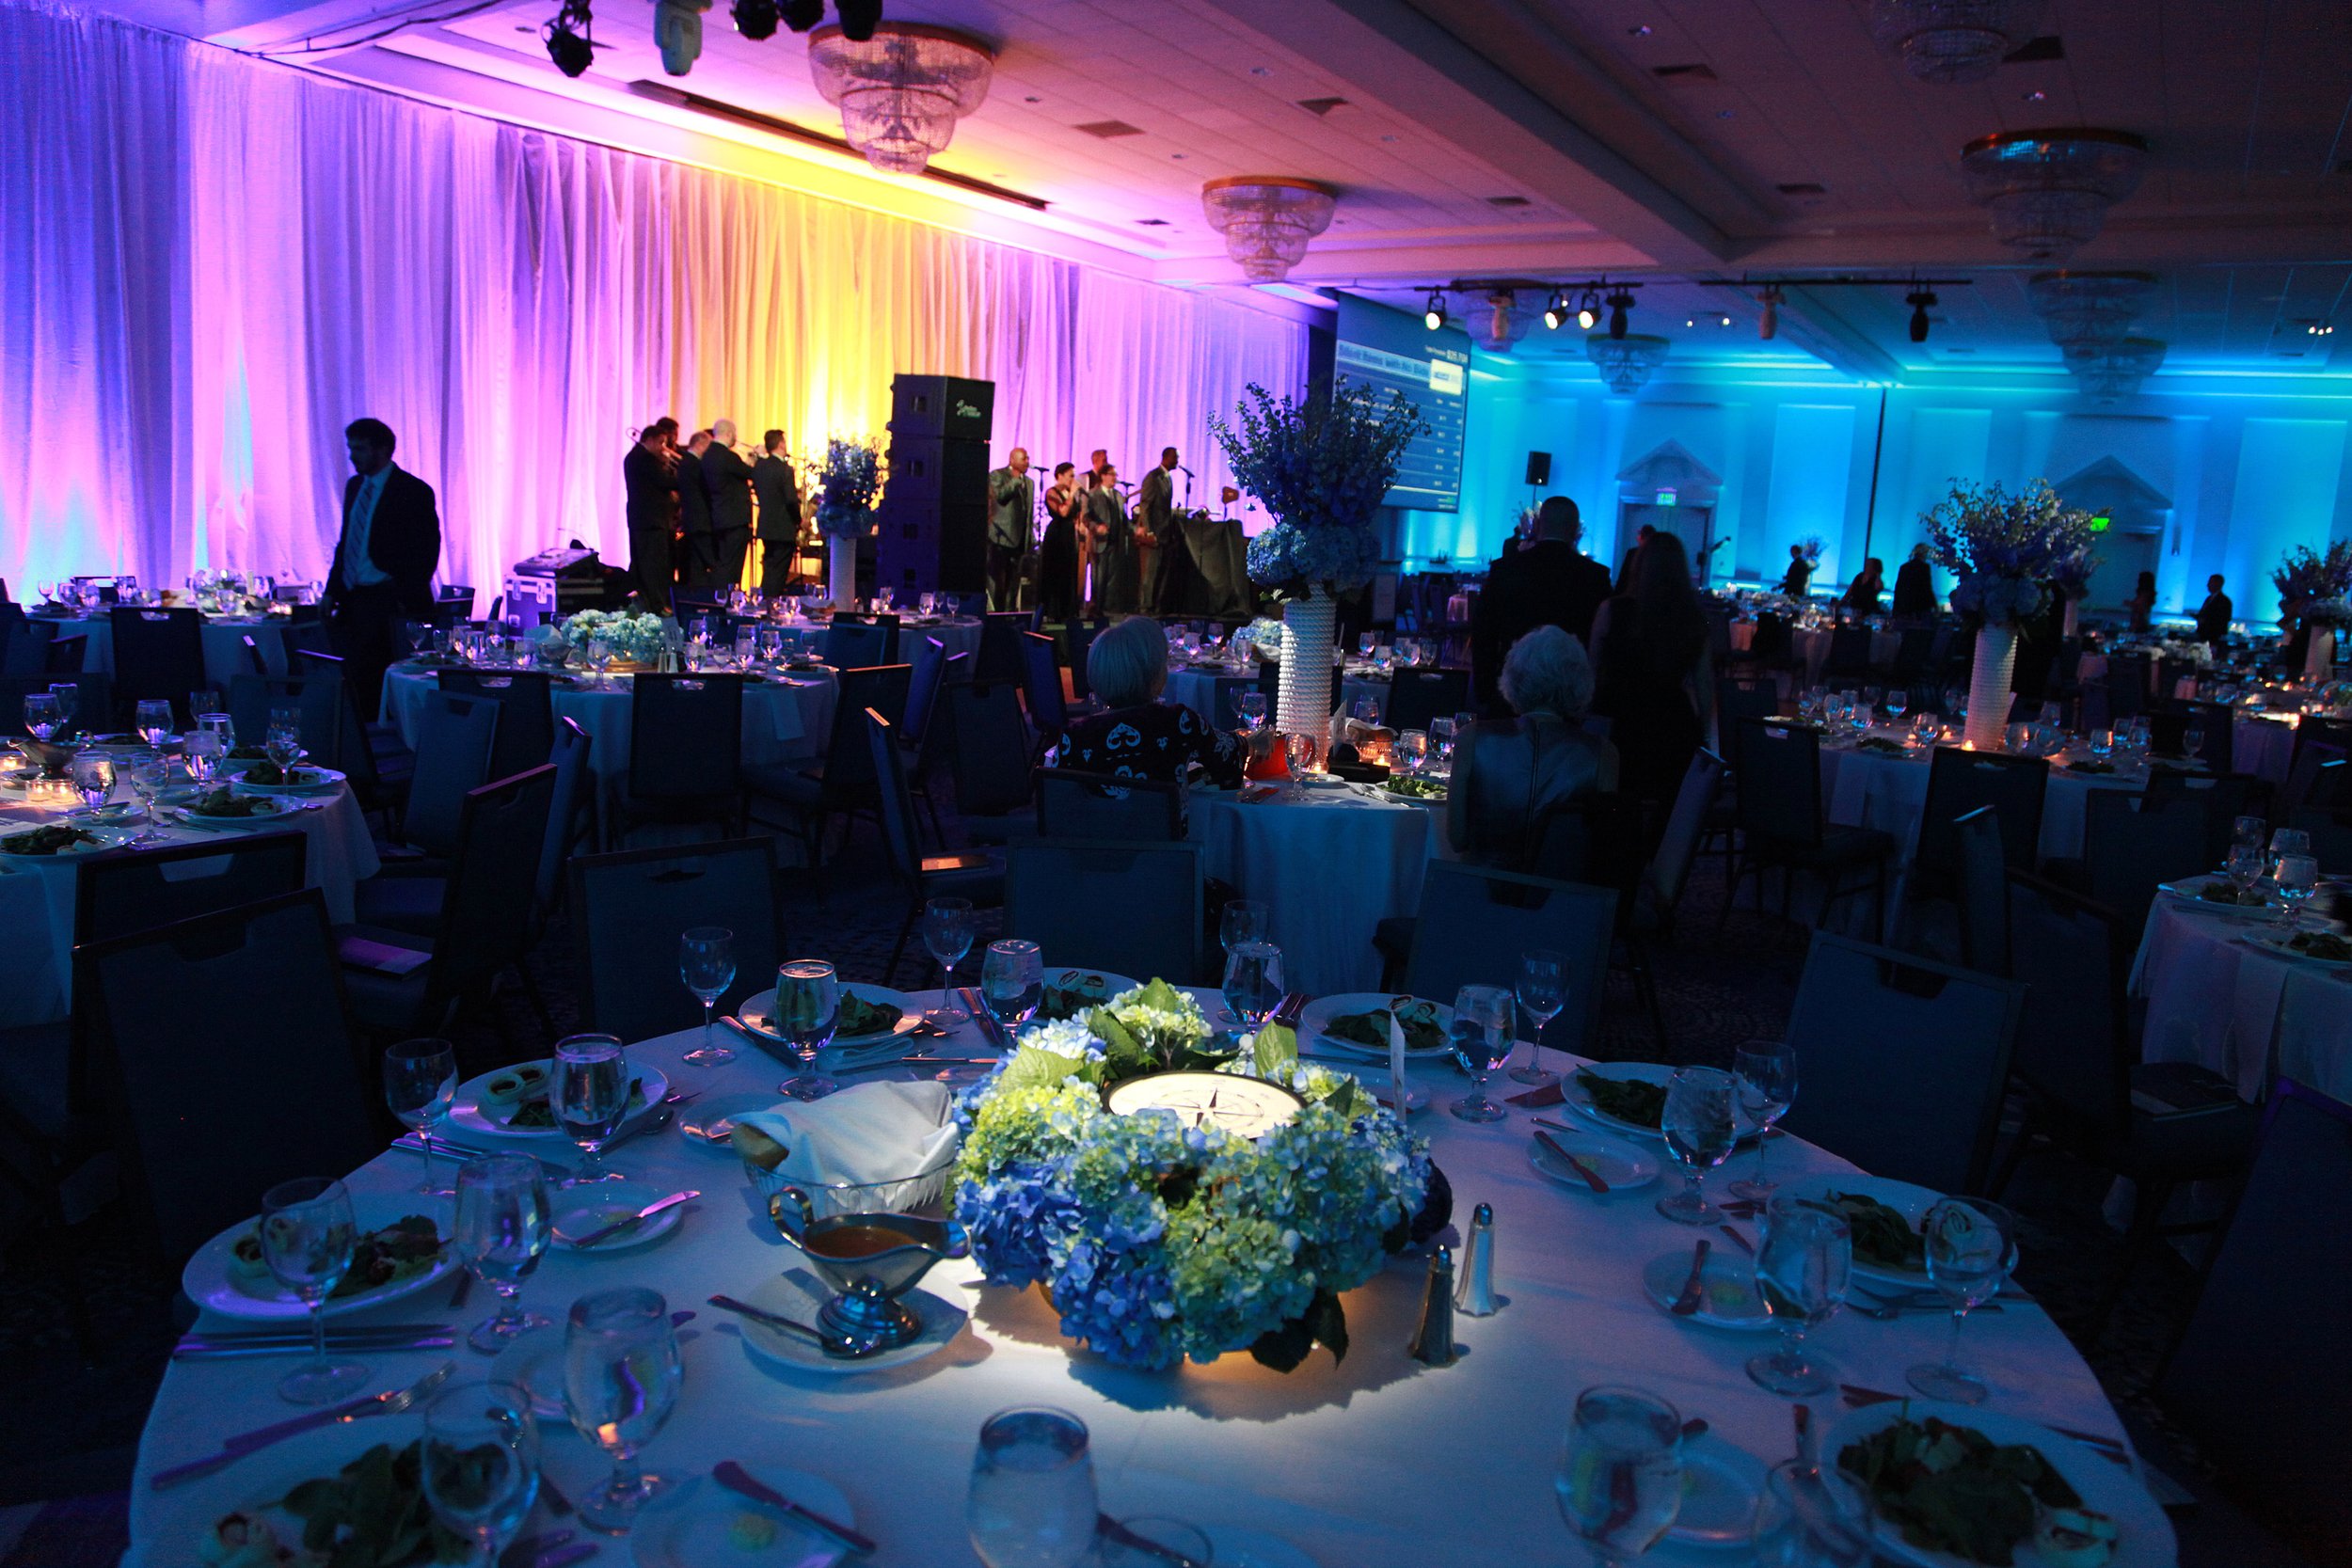  The Meridian Health Foundation 17th Annual Gala, held at the Ocean Place Resort in Long Branch, New Jersey. 